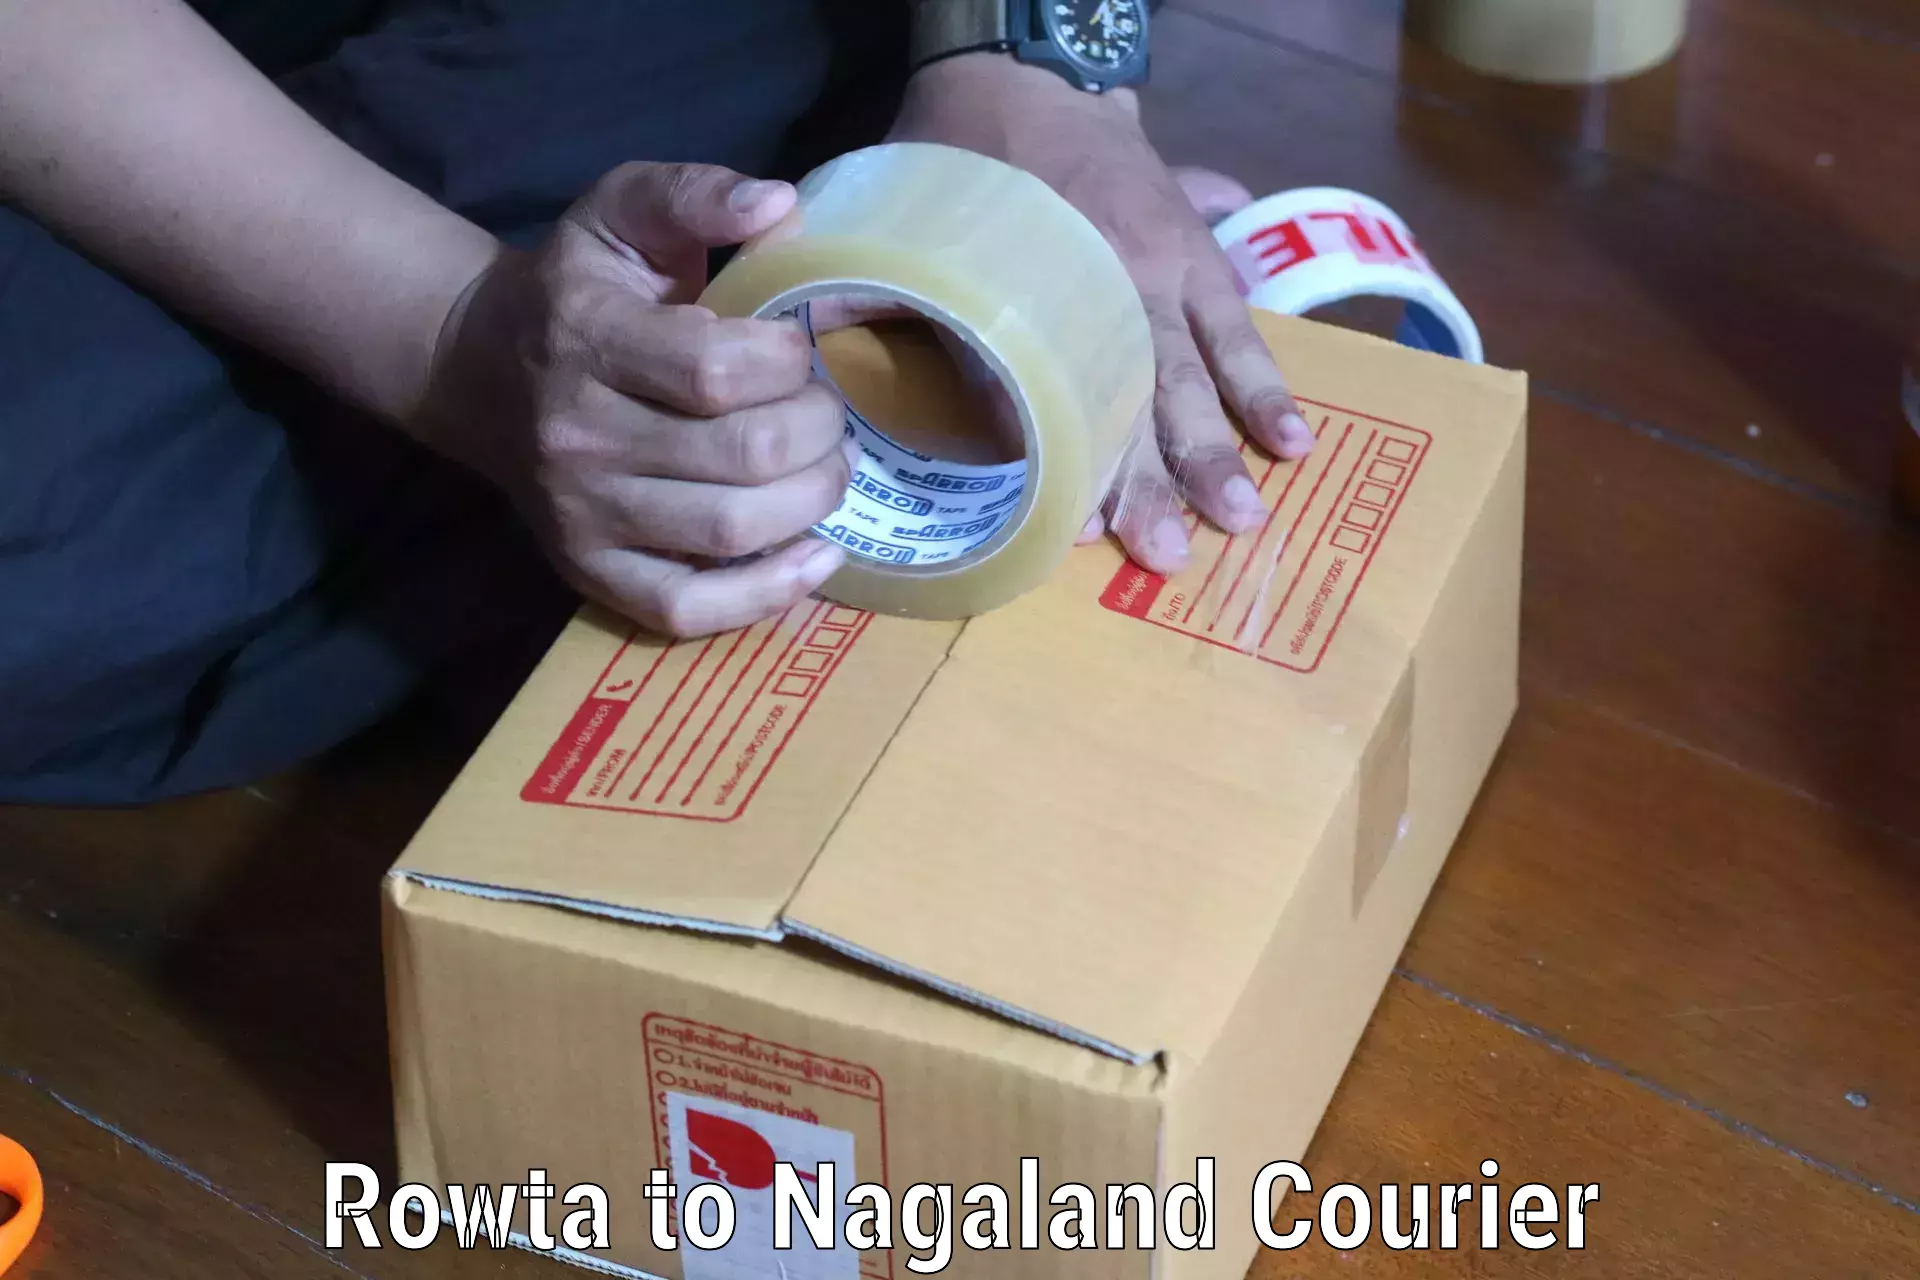 Professional courier handling Rowta to Nagaland